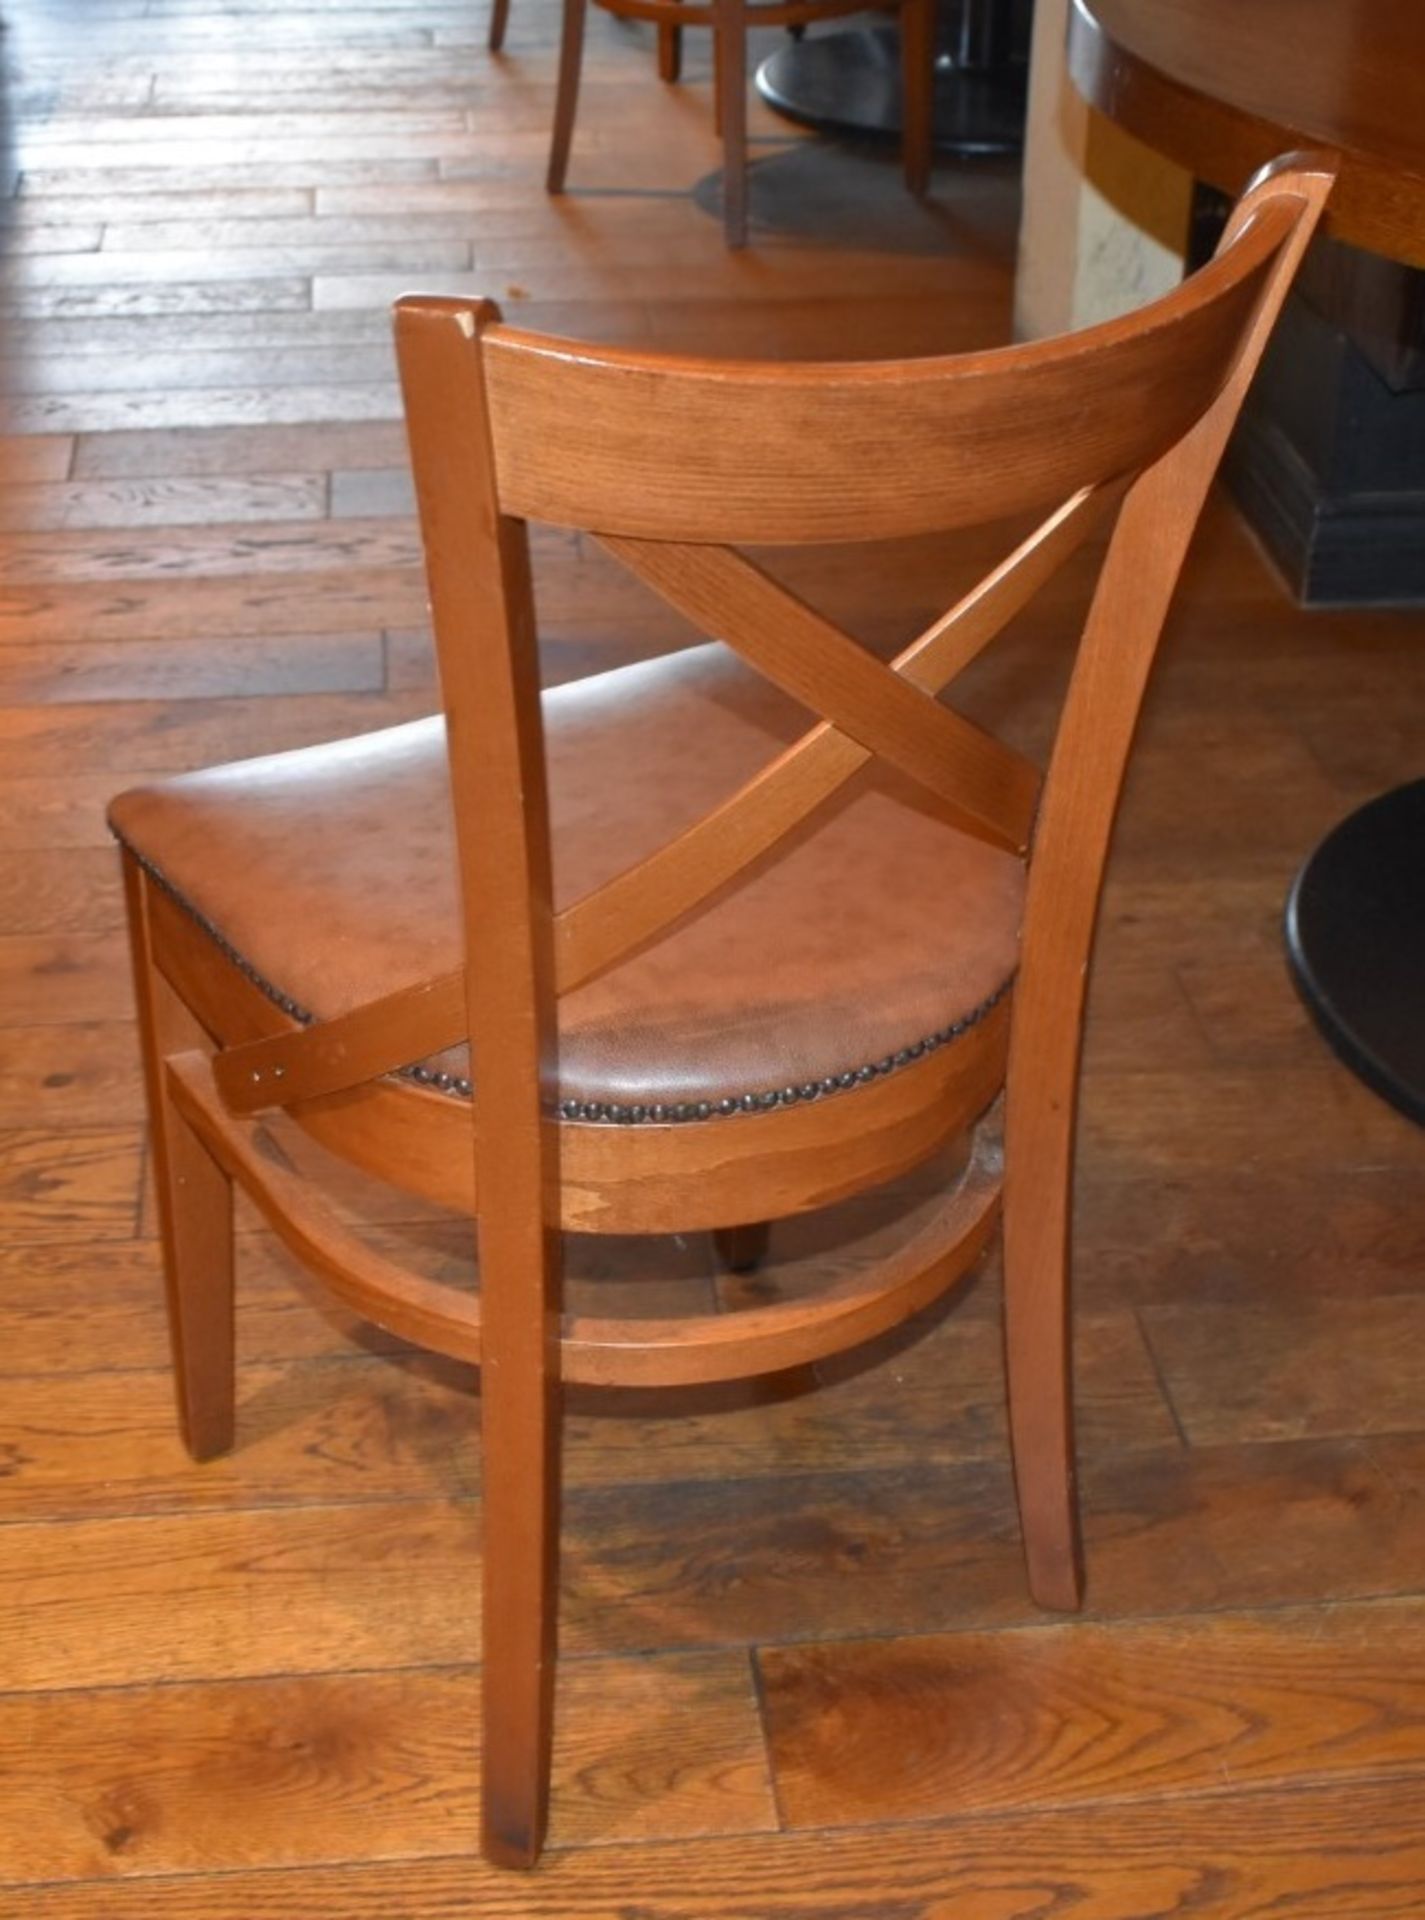 6 x Restaurant Dining Chairs With Wooden Crossbacks and Faux Leather Brown Seat Pads - H84 x W45 cms - Image 4 of 4